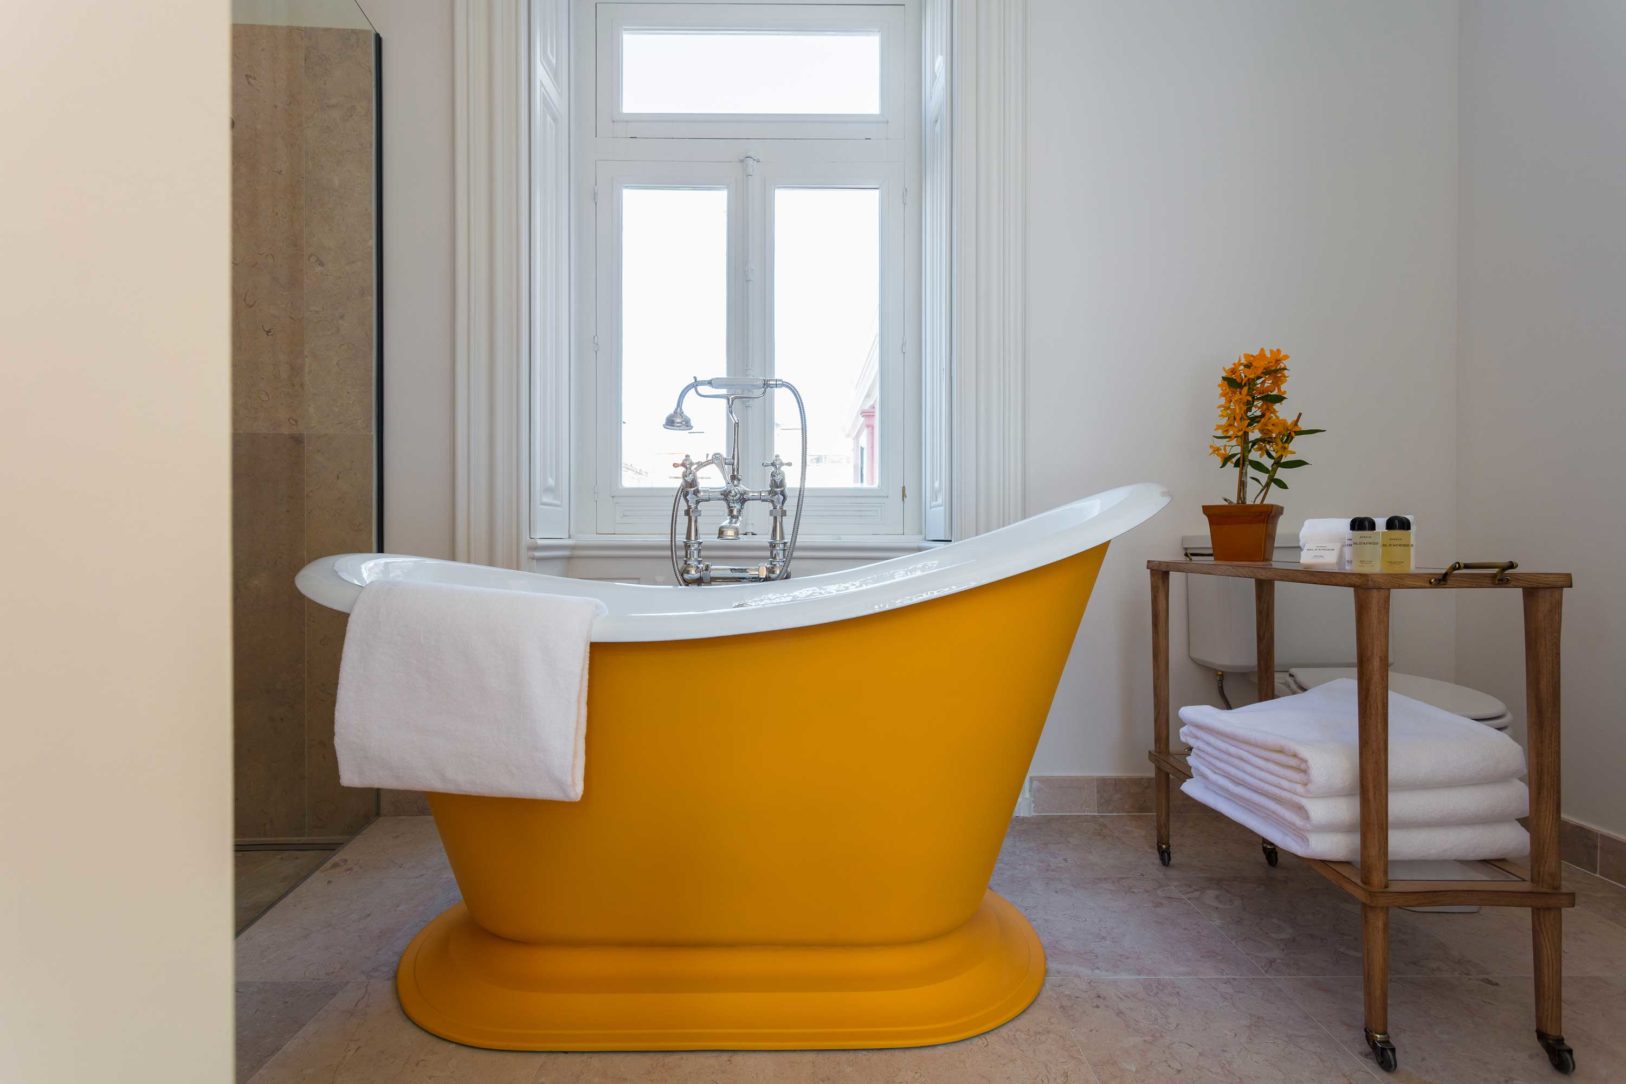 How to make a small bathroom look bigger: Clever tricks to increase space |  Homes & Gardens